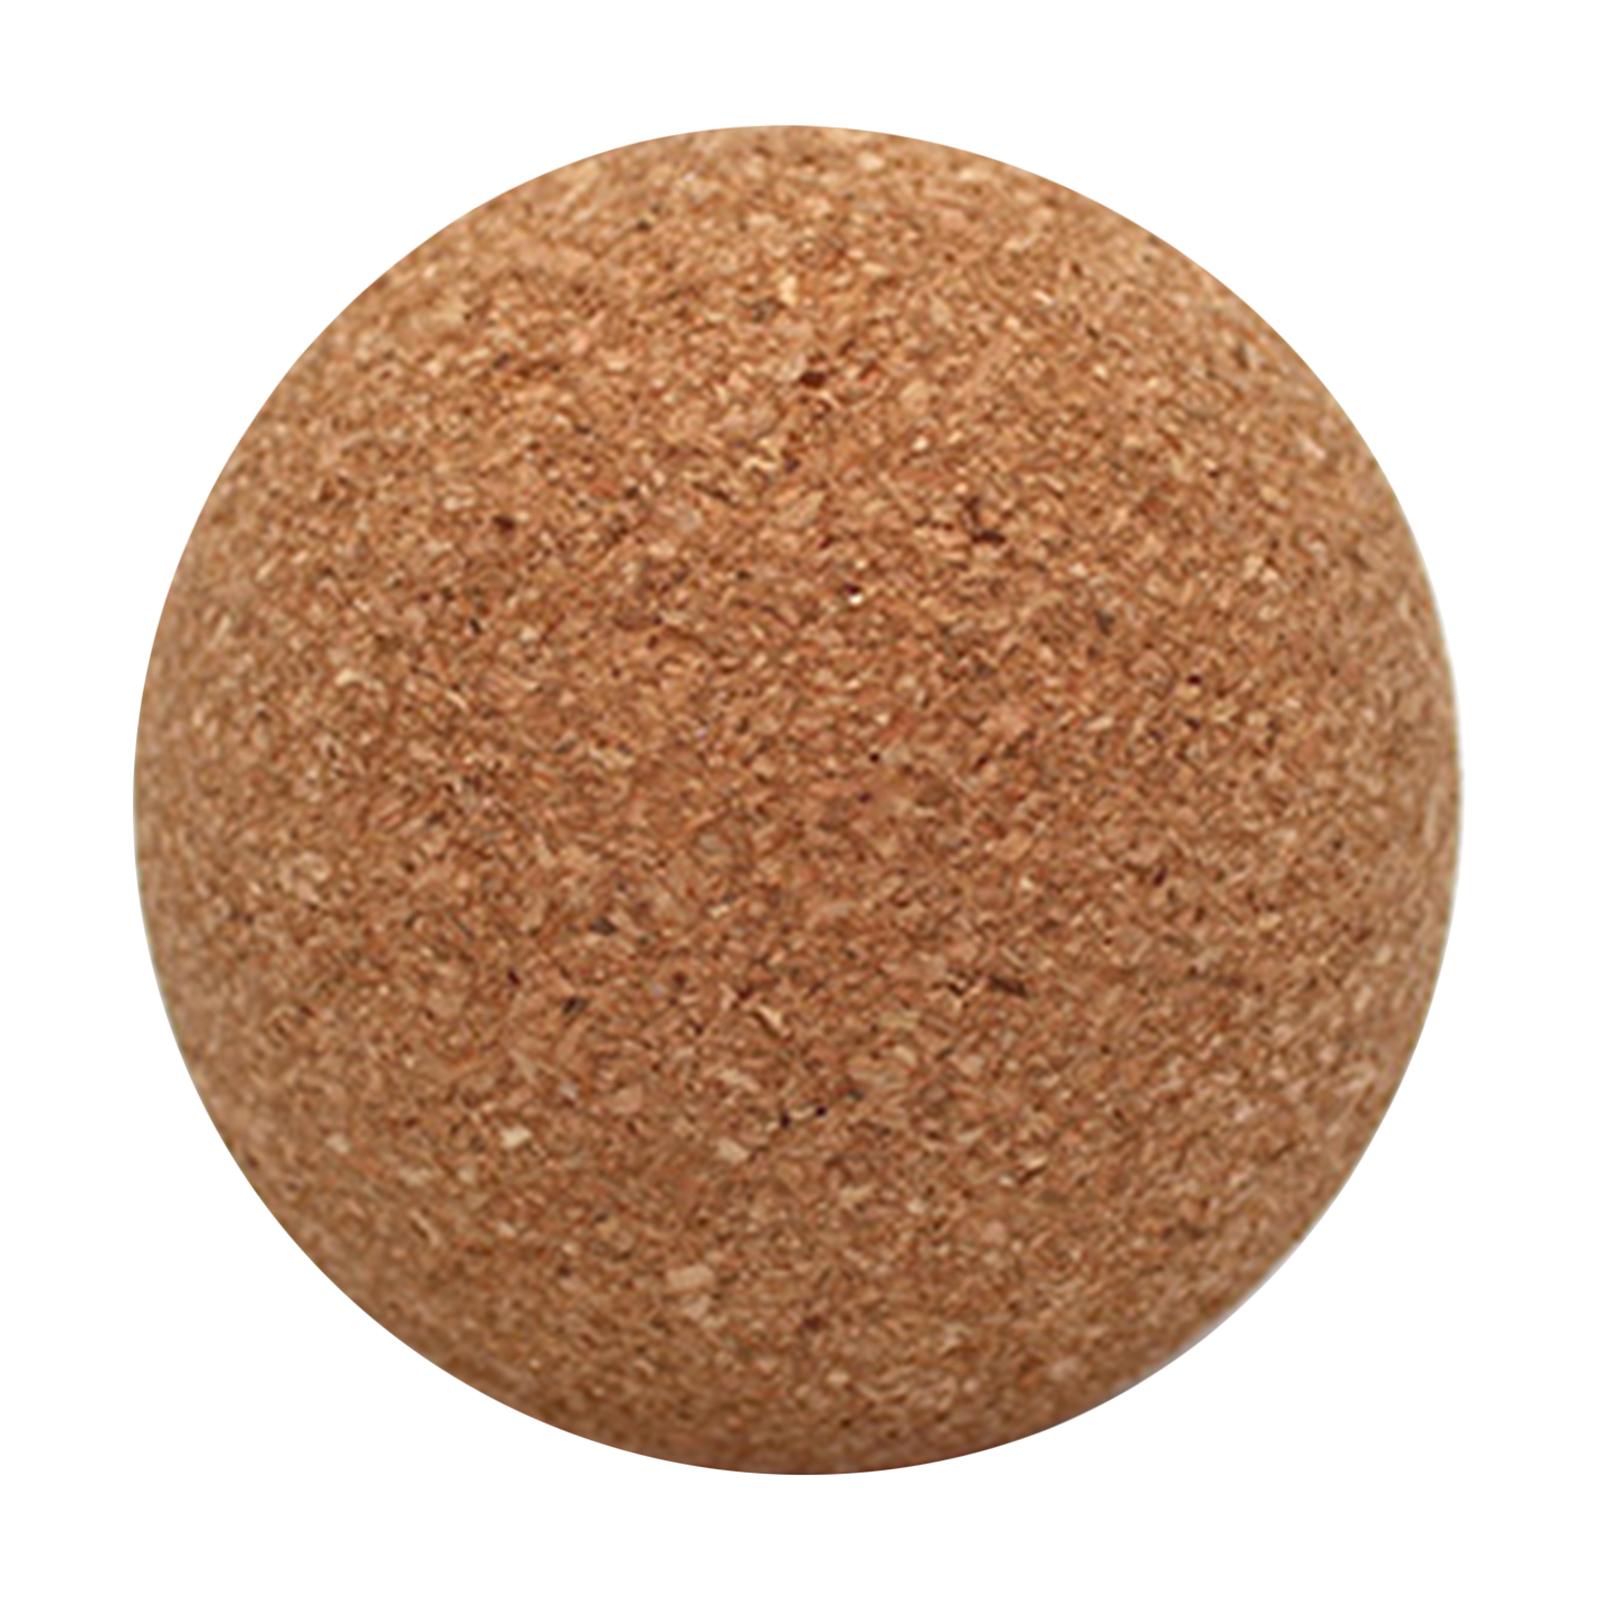 Cork Massage Ball Manual Lower Back Fitness Equipment Roller Portable Point Massage Ball Yoga Ball for Sports Fitness 10cm - image 2 of 8